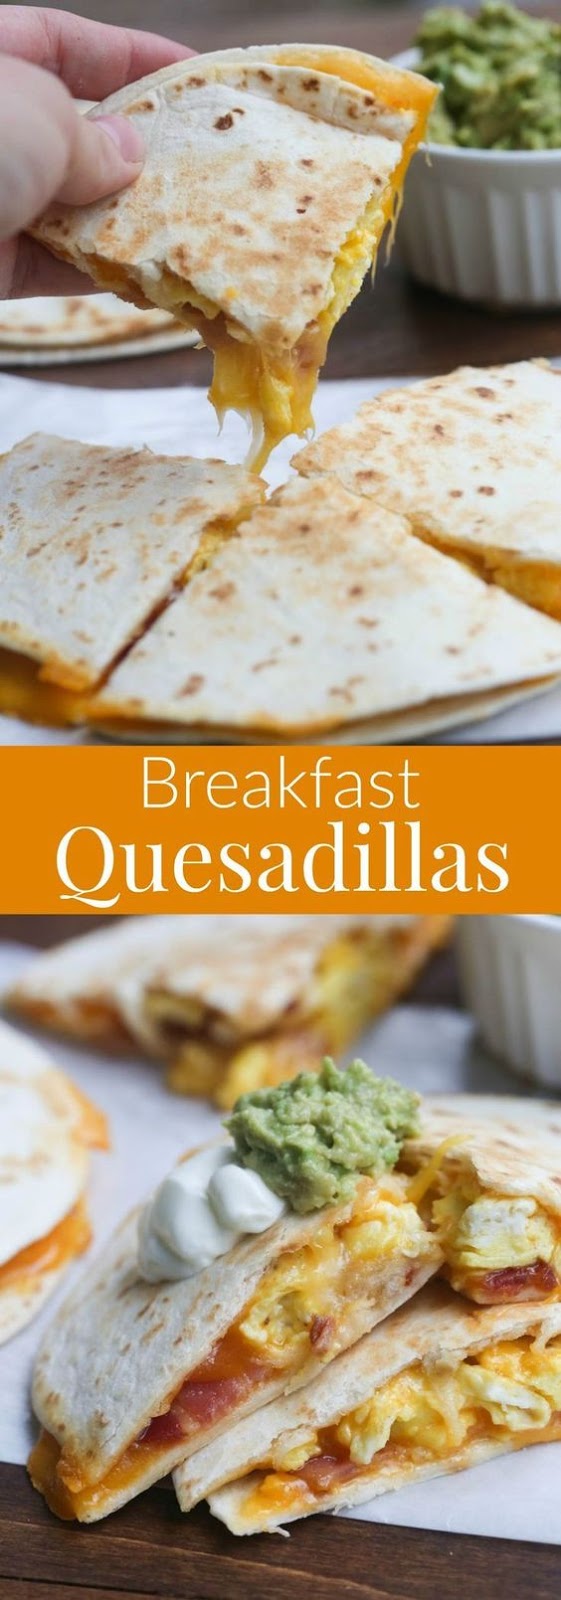 Breakfast Quesadillas with bacon, egg and cheese. An easy breakfast or dinner idea the family is sure to LOVE! | Tastes Better From Scratch